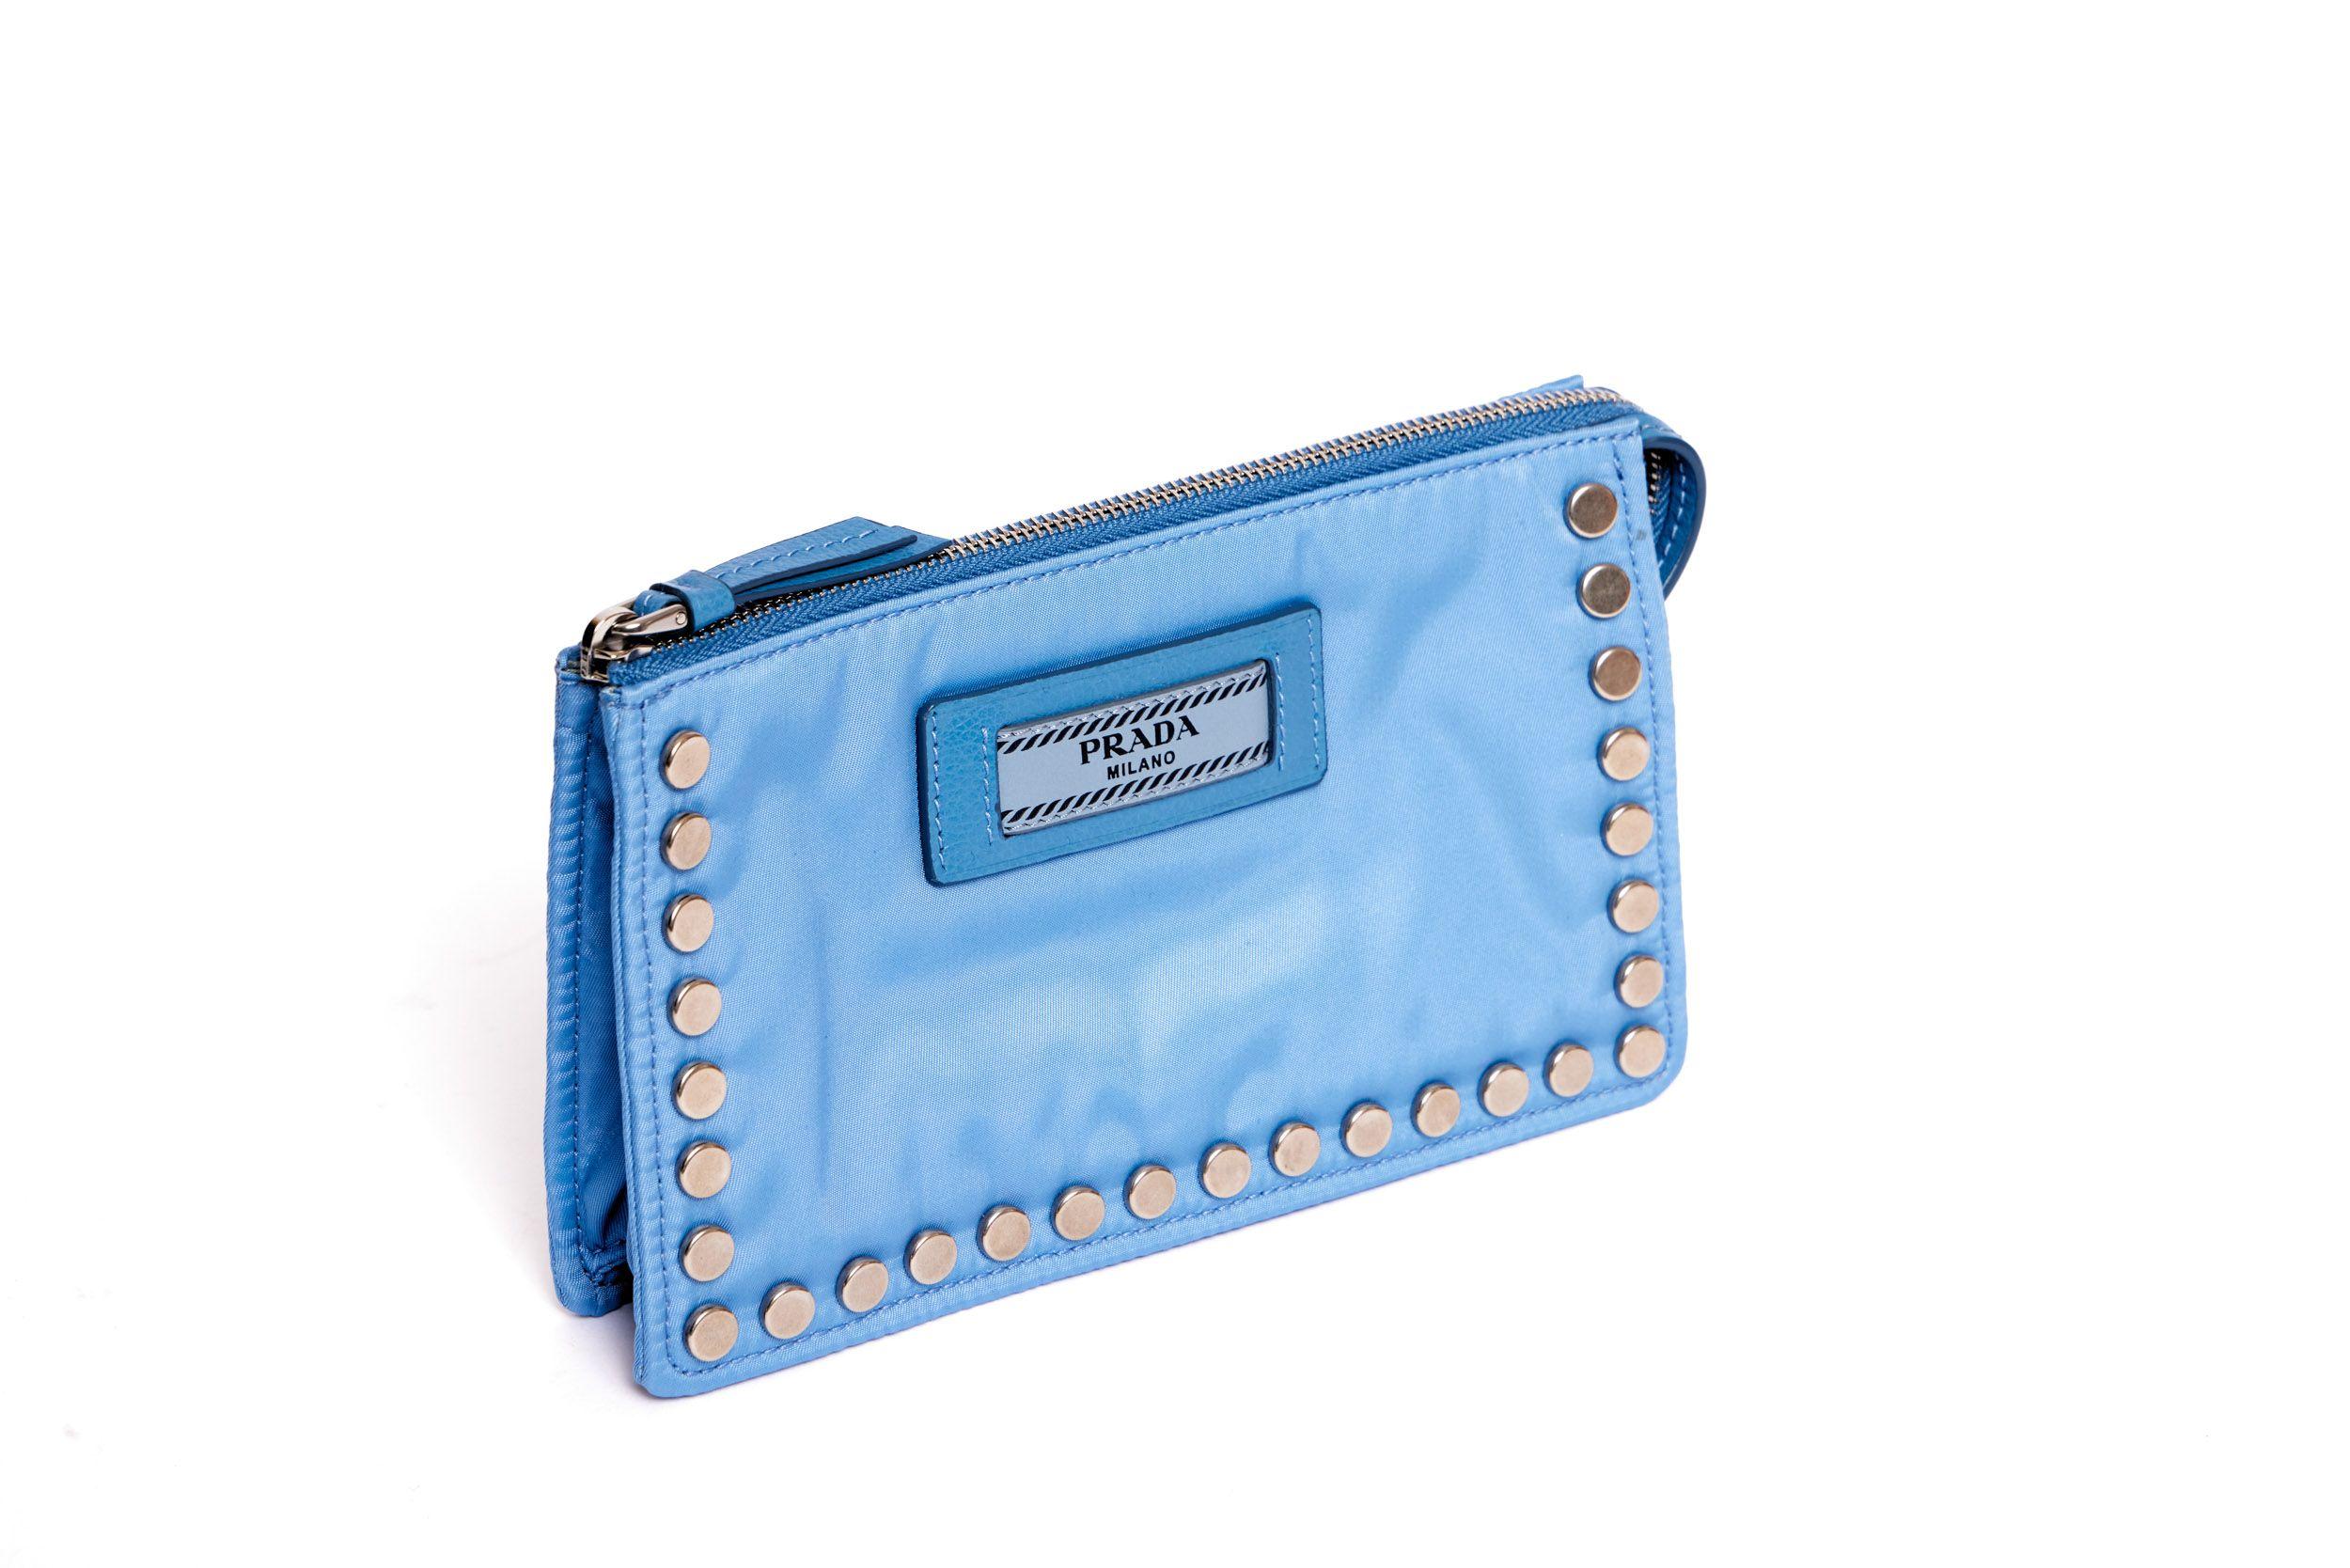 Blue fabric Prada pochette with silver metal studs and a blue leather logo tag. The hardware is in a silver-tone. The pochette is in excellent condition and comes with the authenticity card and original box.